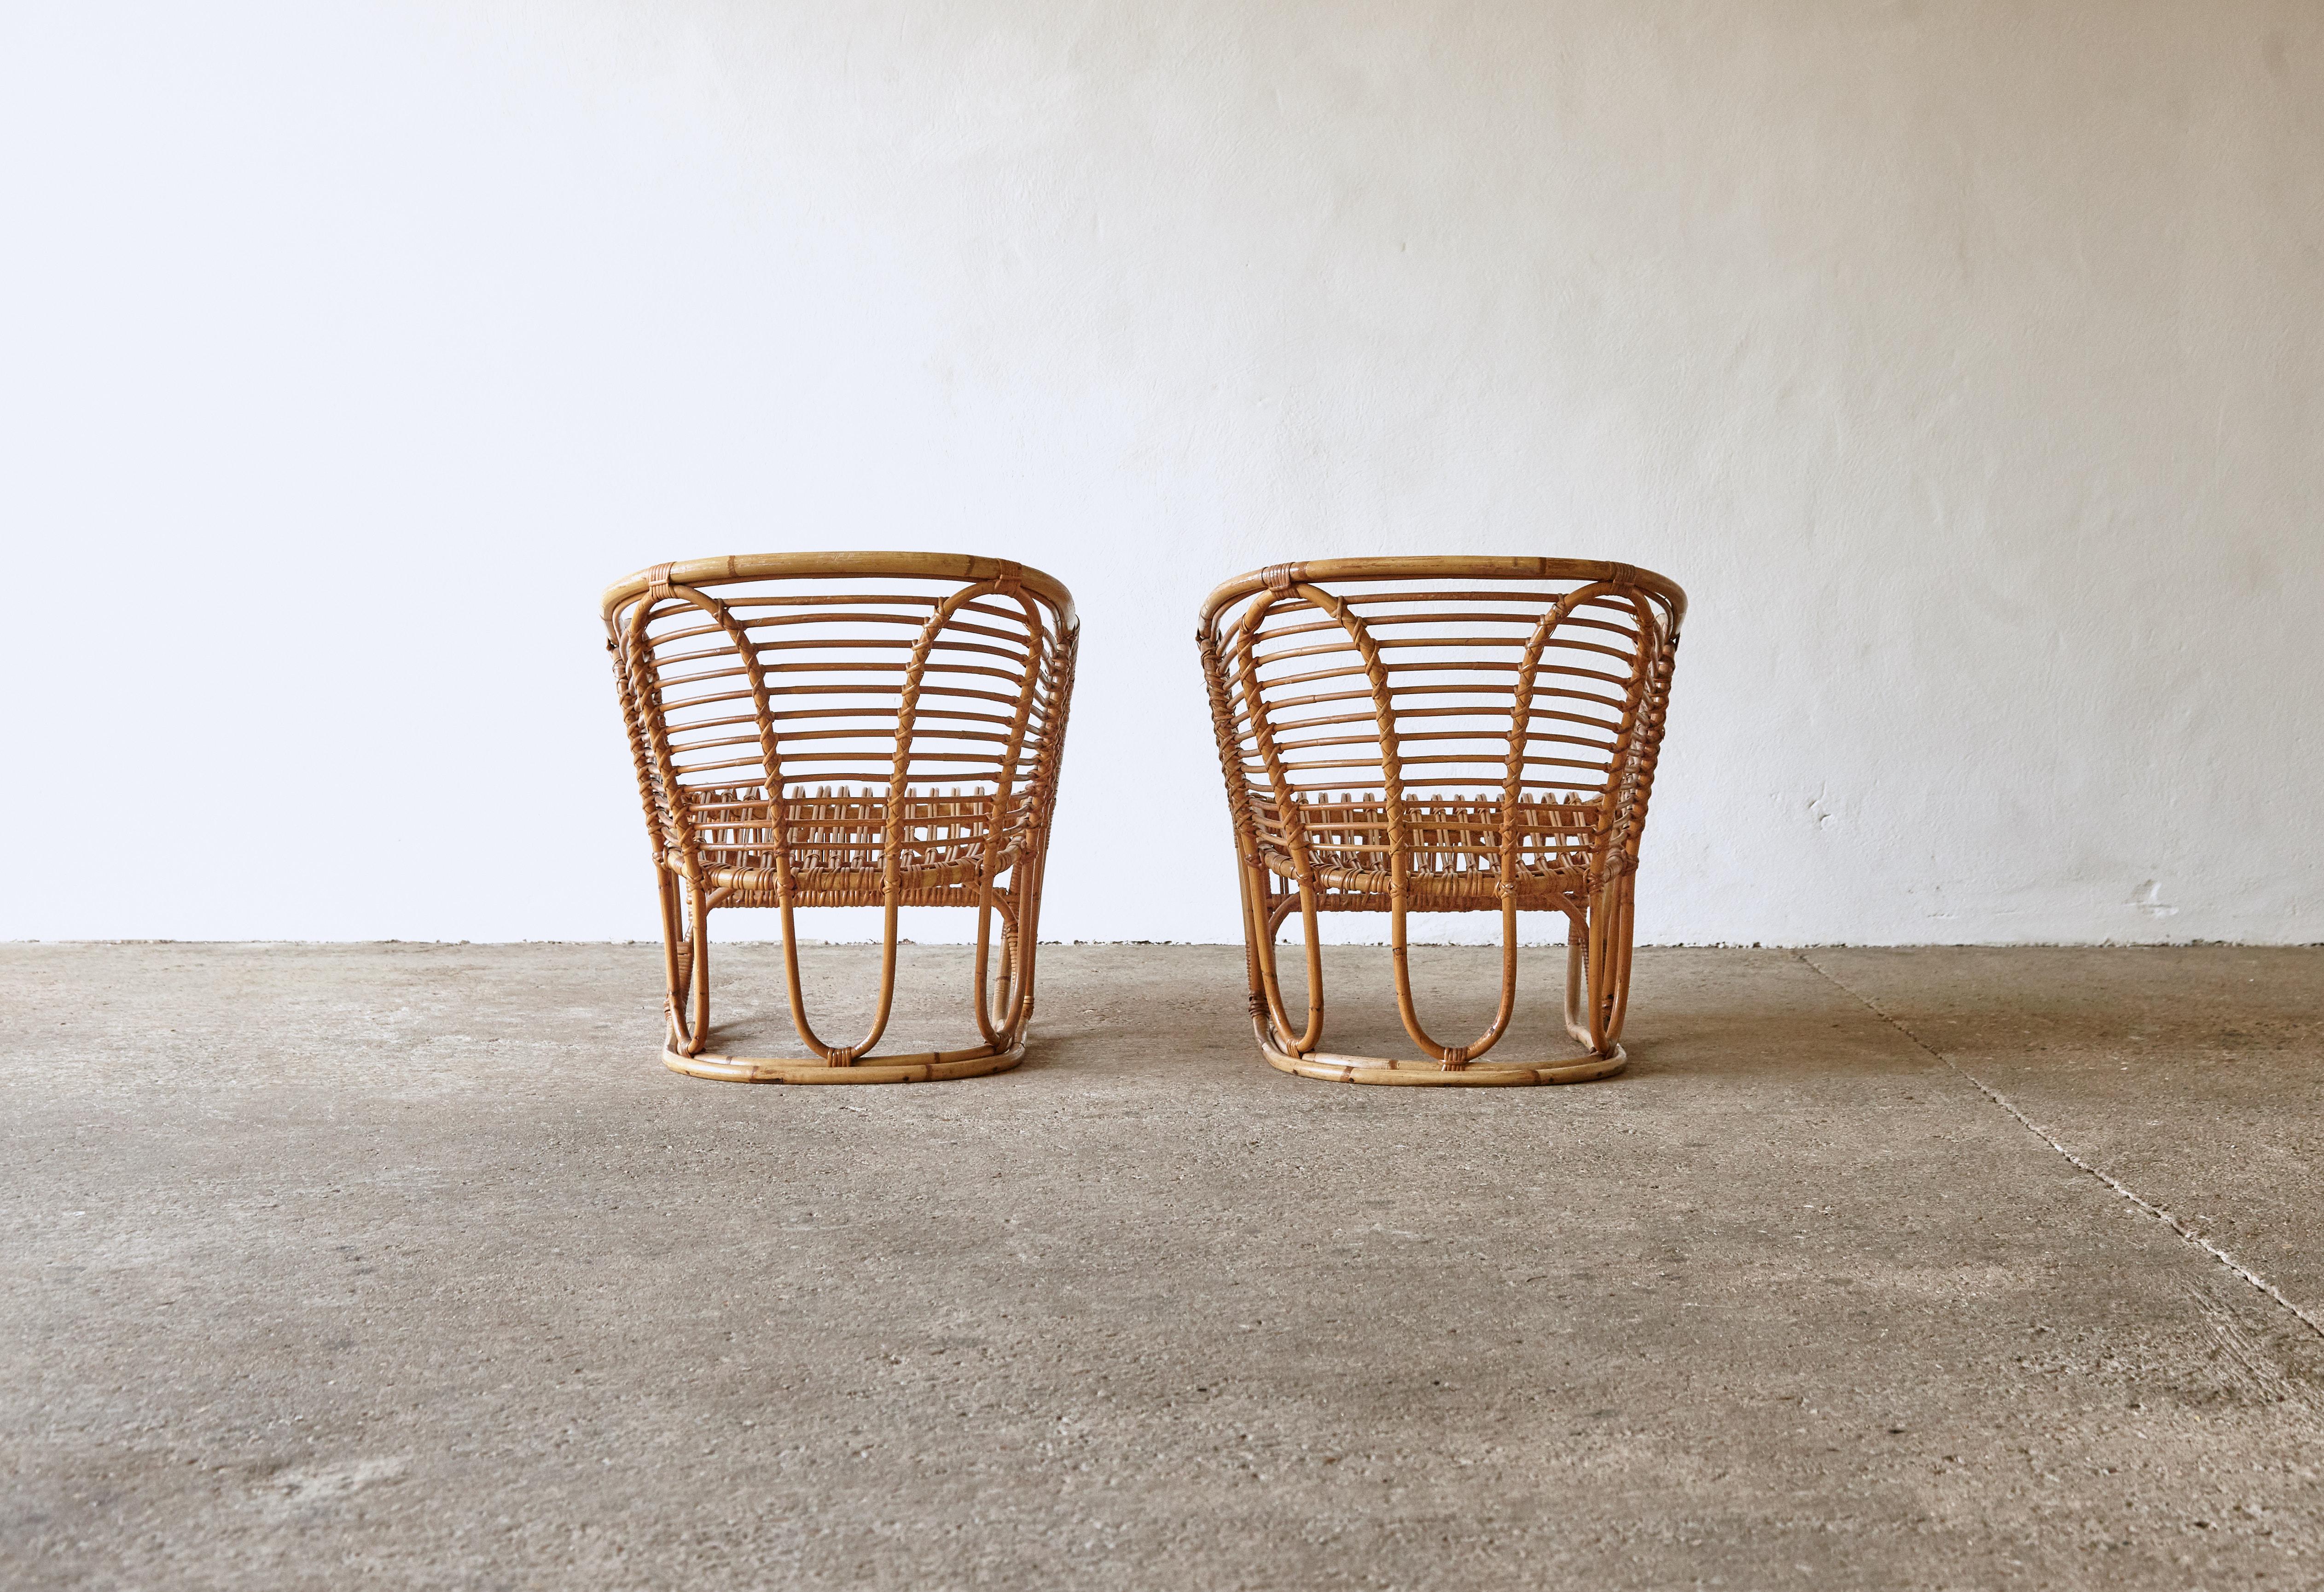 Pair of Tove & Edvard Kindt-Larsen Bamboo and Cane Chairs, Denmark, 1940s 1